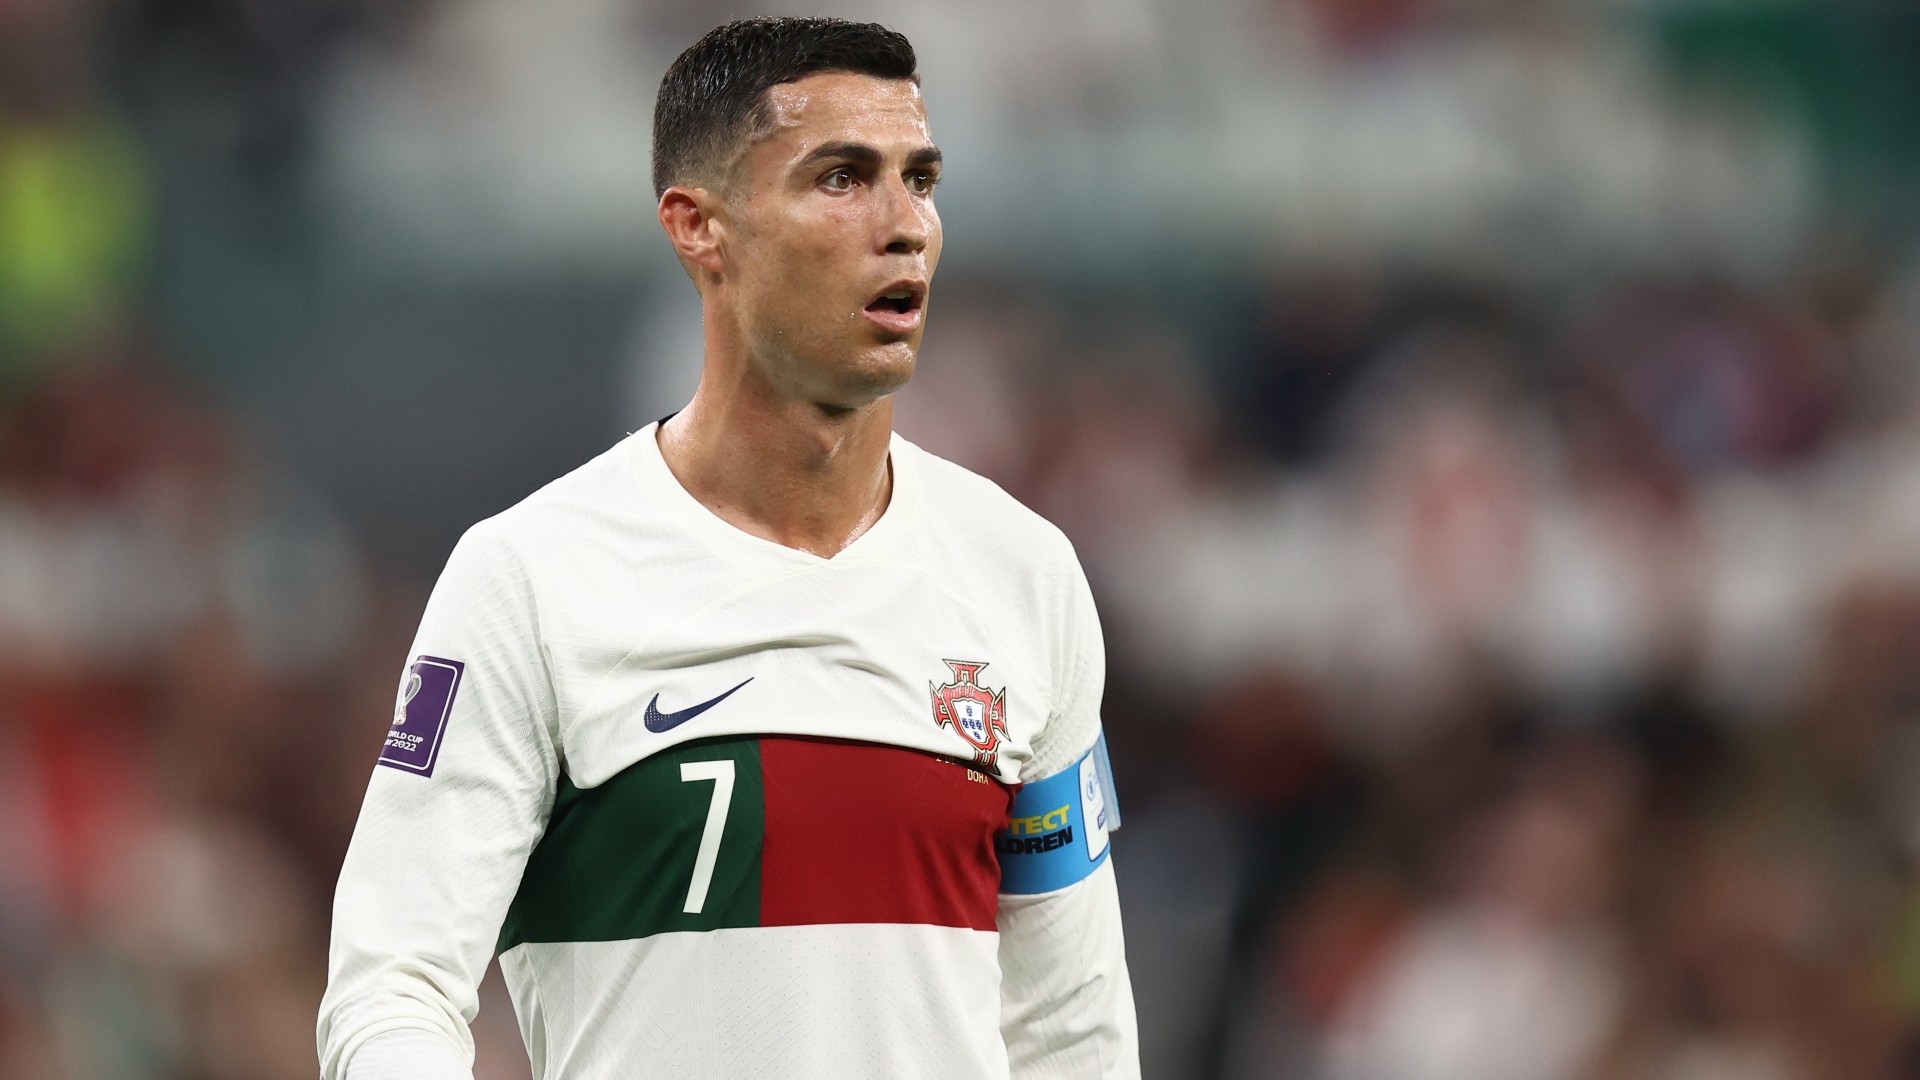 Ronaldo-Messi final can't happen now at World Cup 2022 – and why